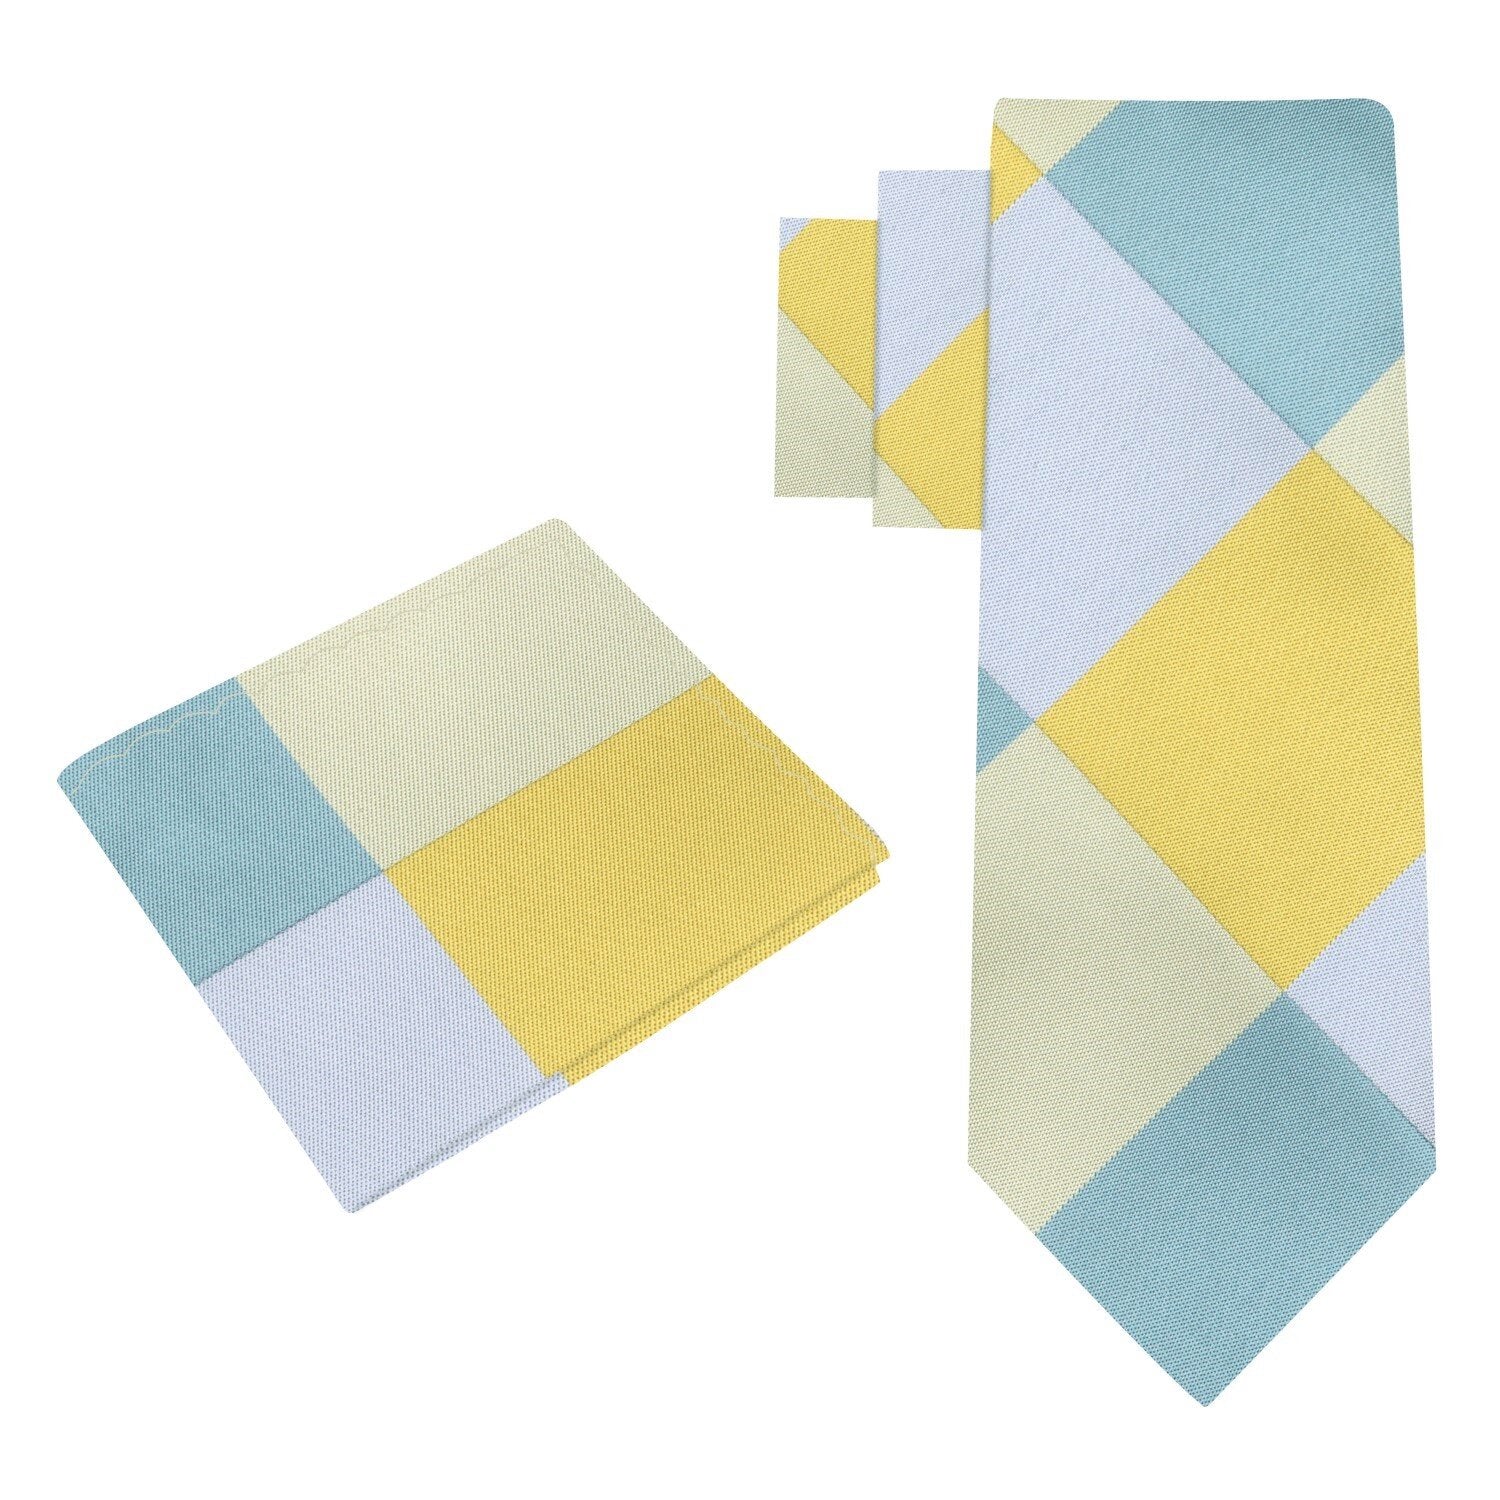 Alt View: Yellow, Light Blue, Pale Green, Blue/Grey Large Diamond Tie and Pocket Square